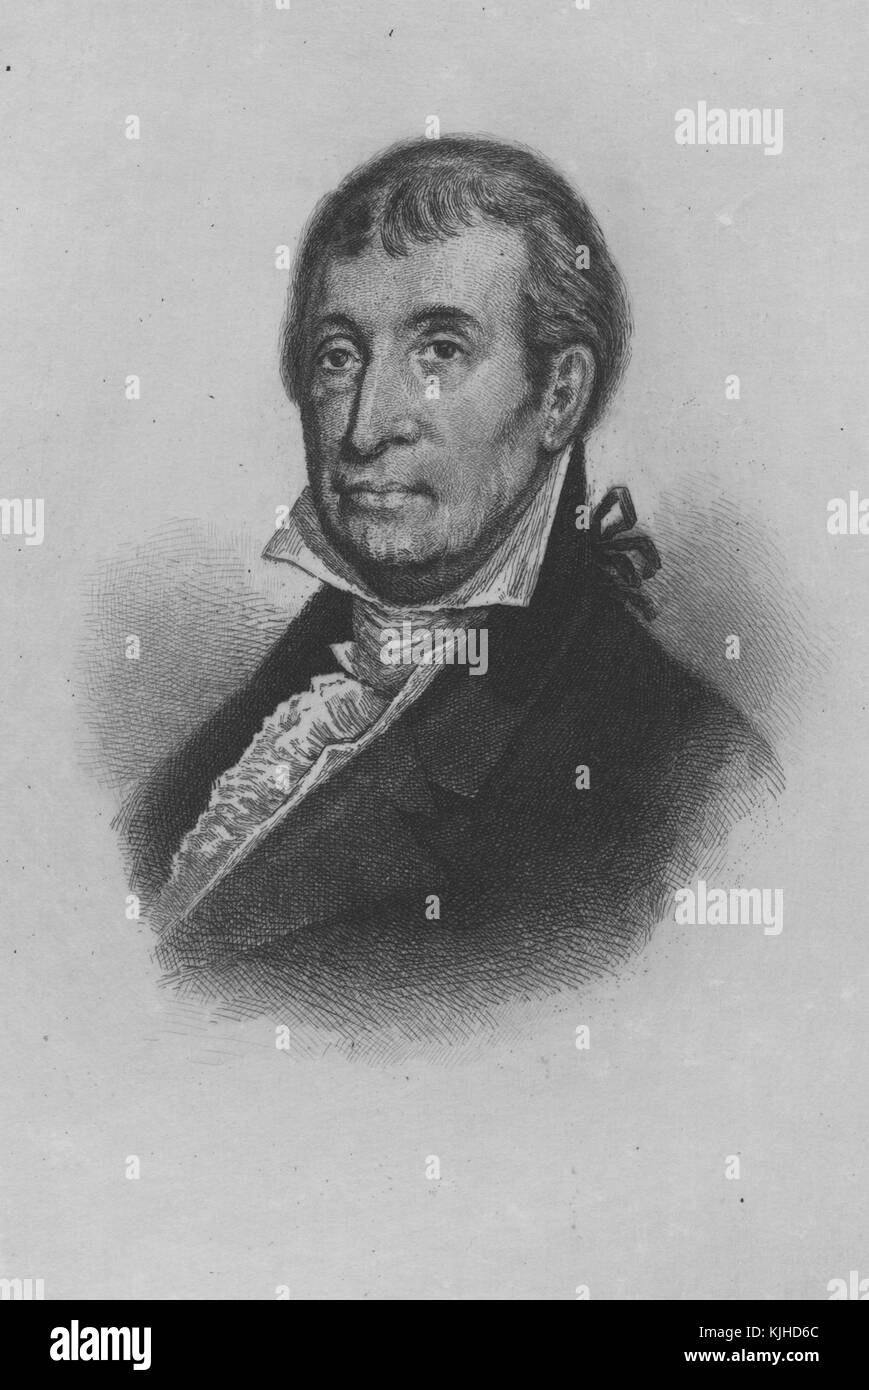 A etching from a portrait of Luther Martin, he was an American politician who was one of the Founding Fathers of the United States, he was one of the three delegates to the Continental Convention that refused to sign the United States Constitution believing that it violated states rights, United States, 1800. From the New York Public Library. Stock Photo